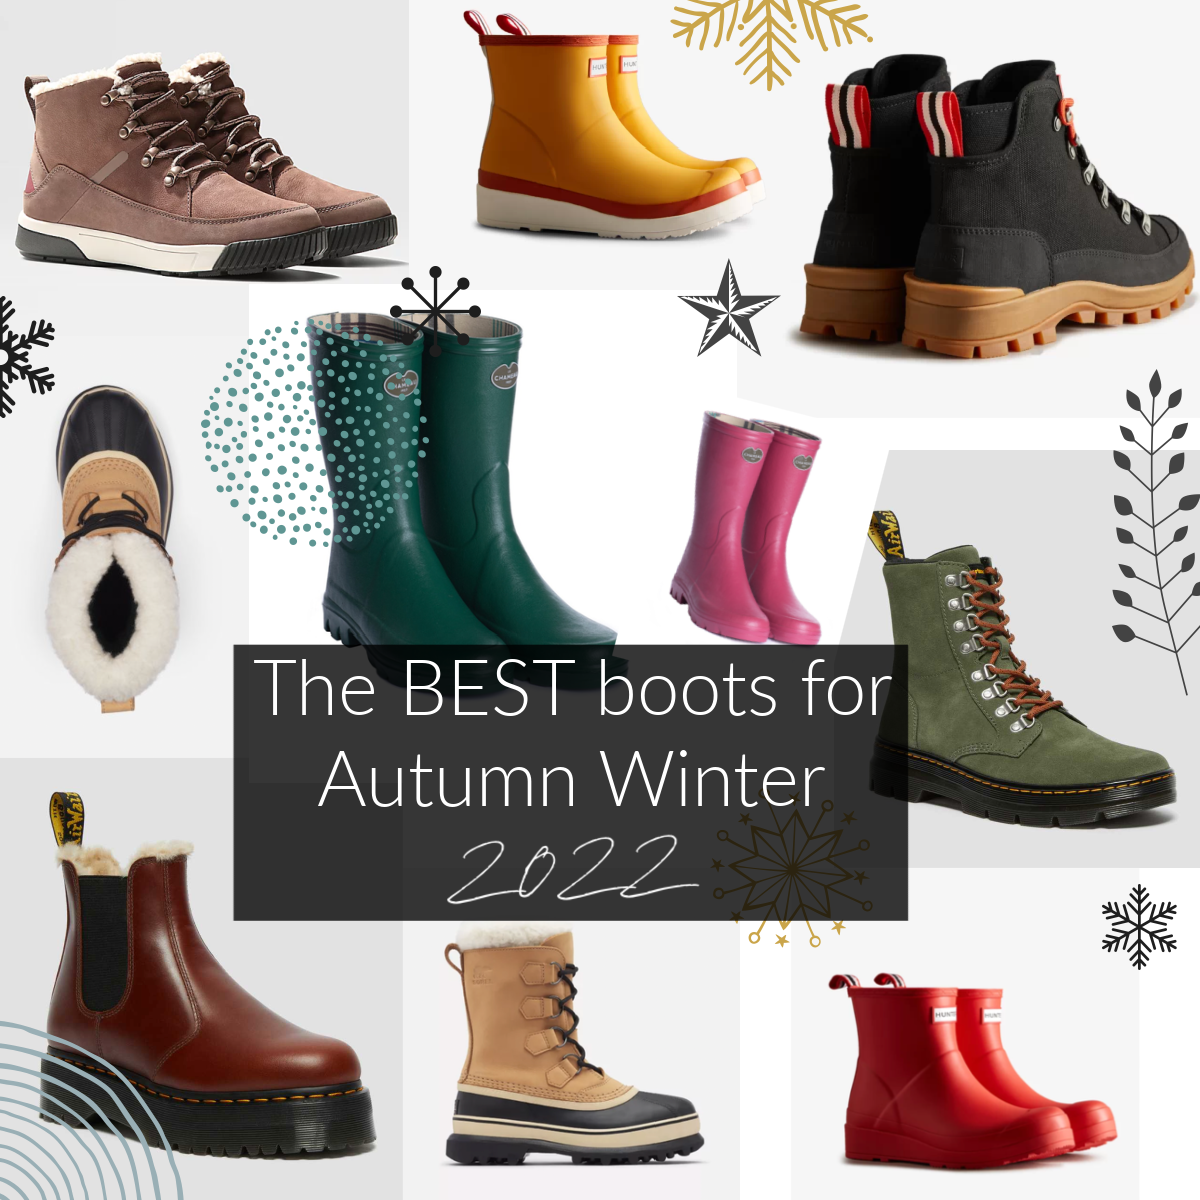 5 of the BEST Wellington Boots & Winter Boots for
Autumn Winter 2022!